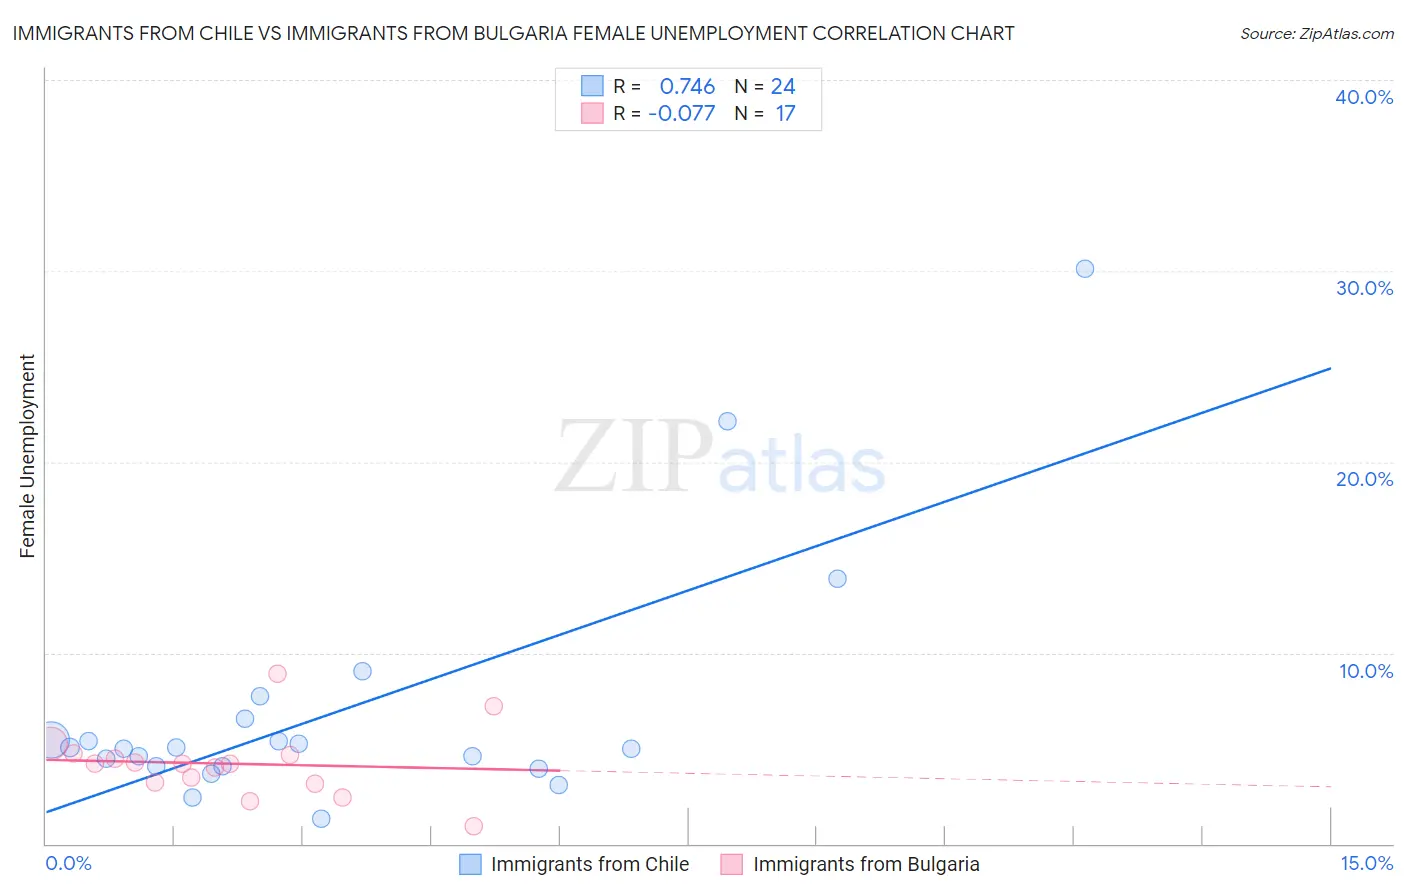 Immigrants from Chile vs Immigrants from Bulgaria Female Unemployment